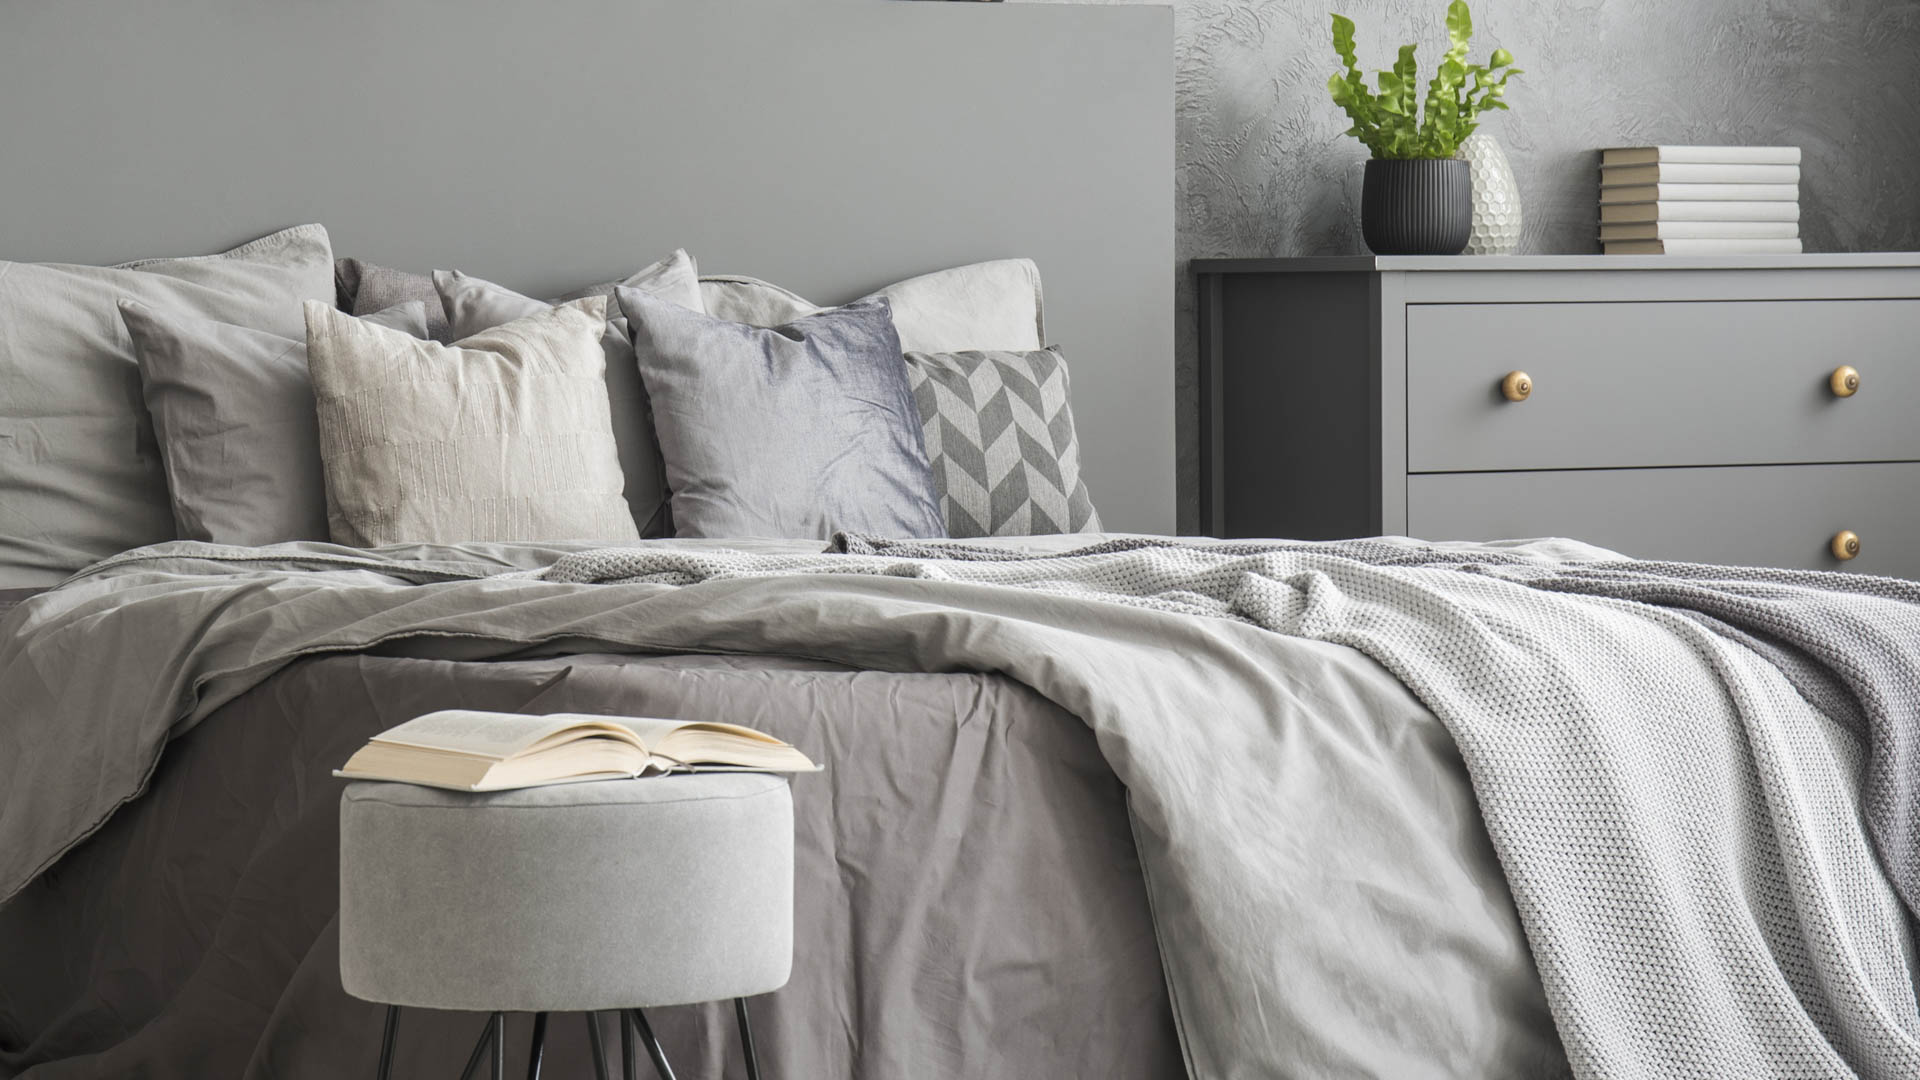 Open book placed on pouf standing next to double bed with grey b